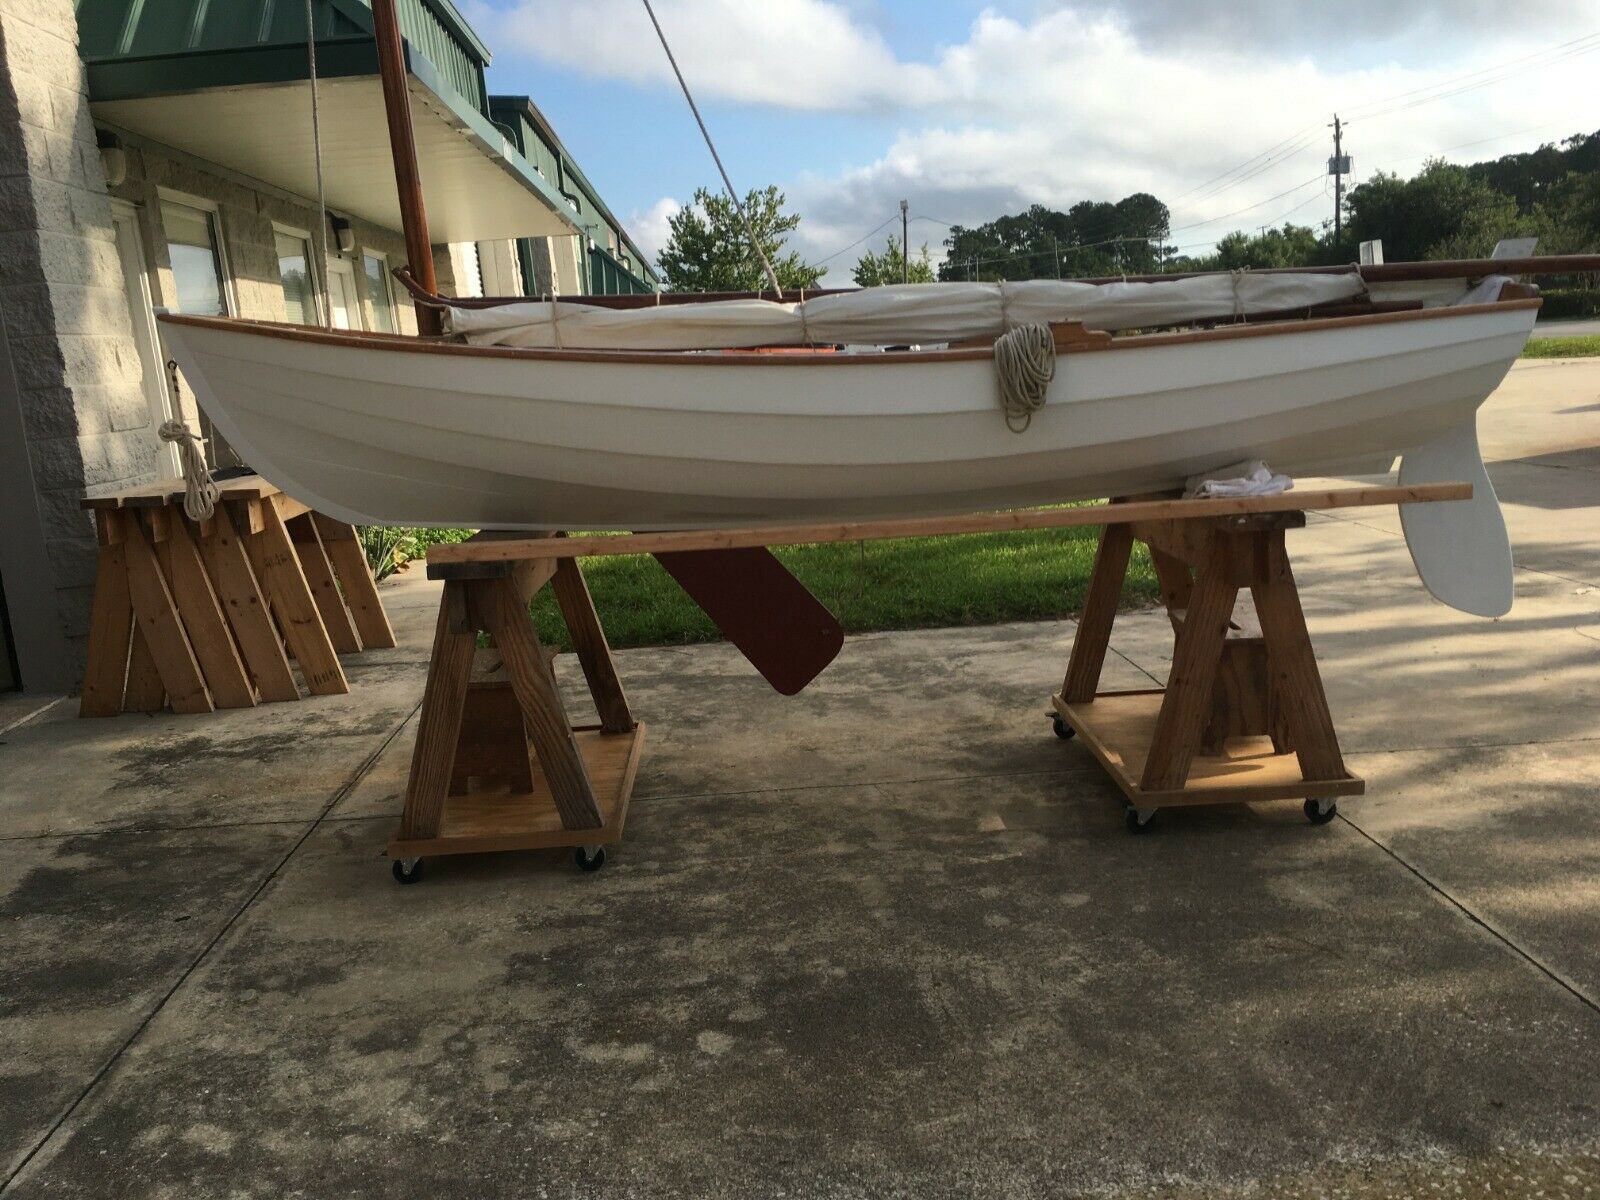 Chaisson Sailing Dinghy 1985 for sale for $3,700 - Boats 